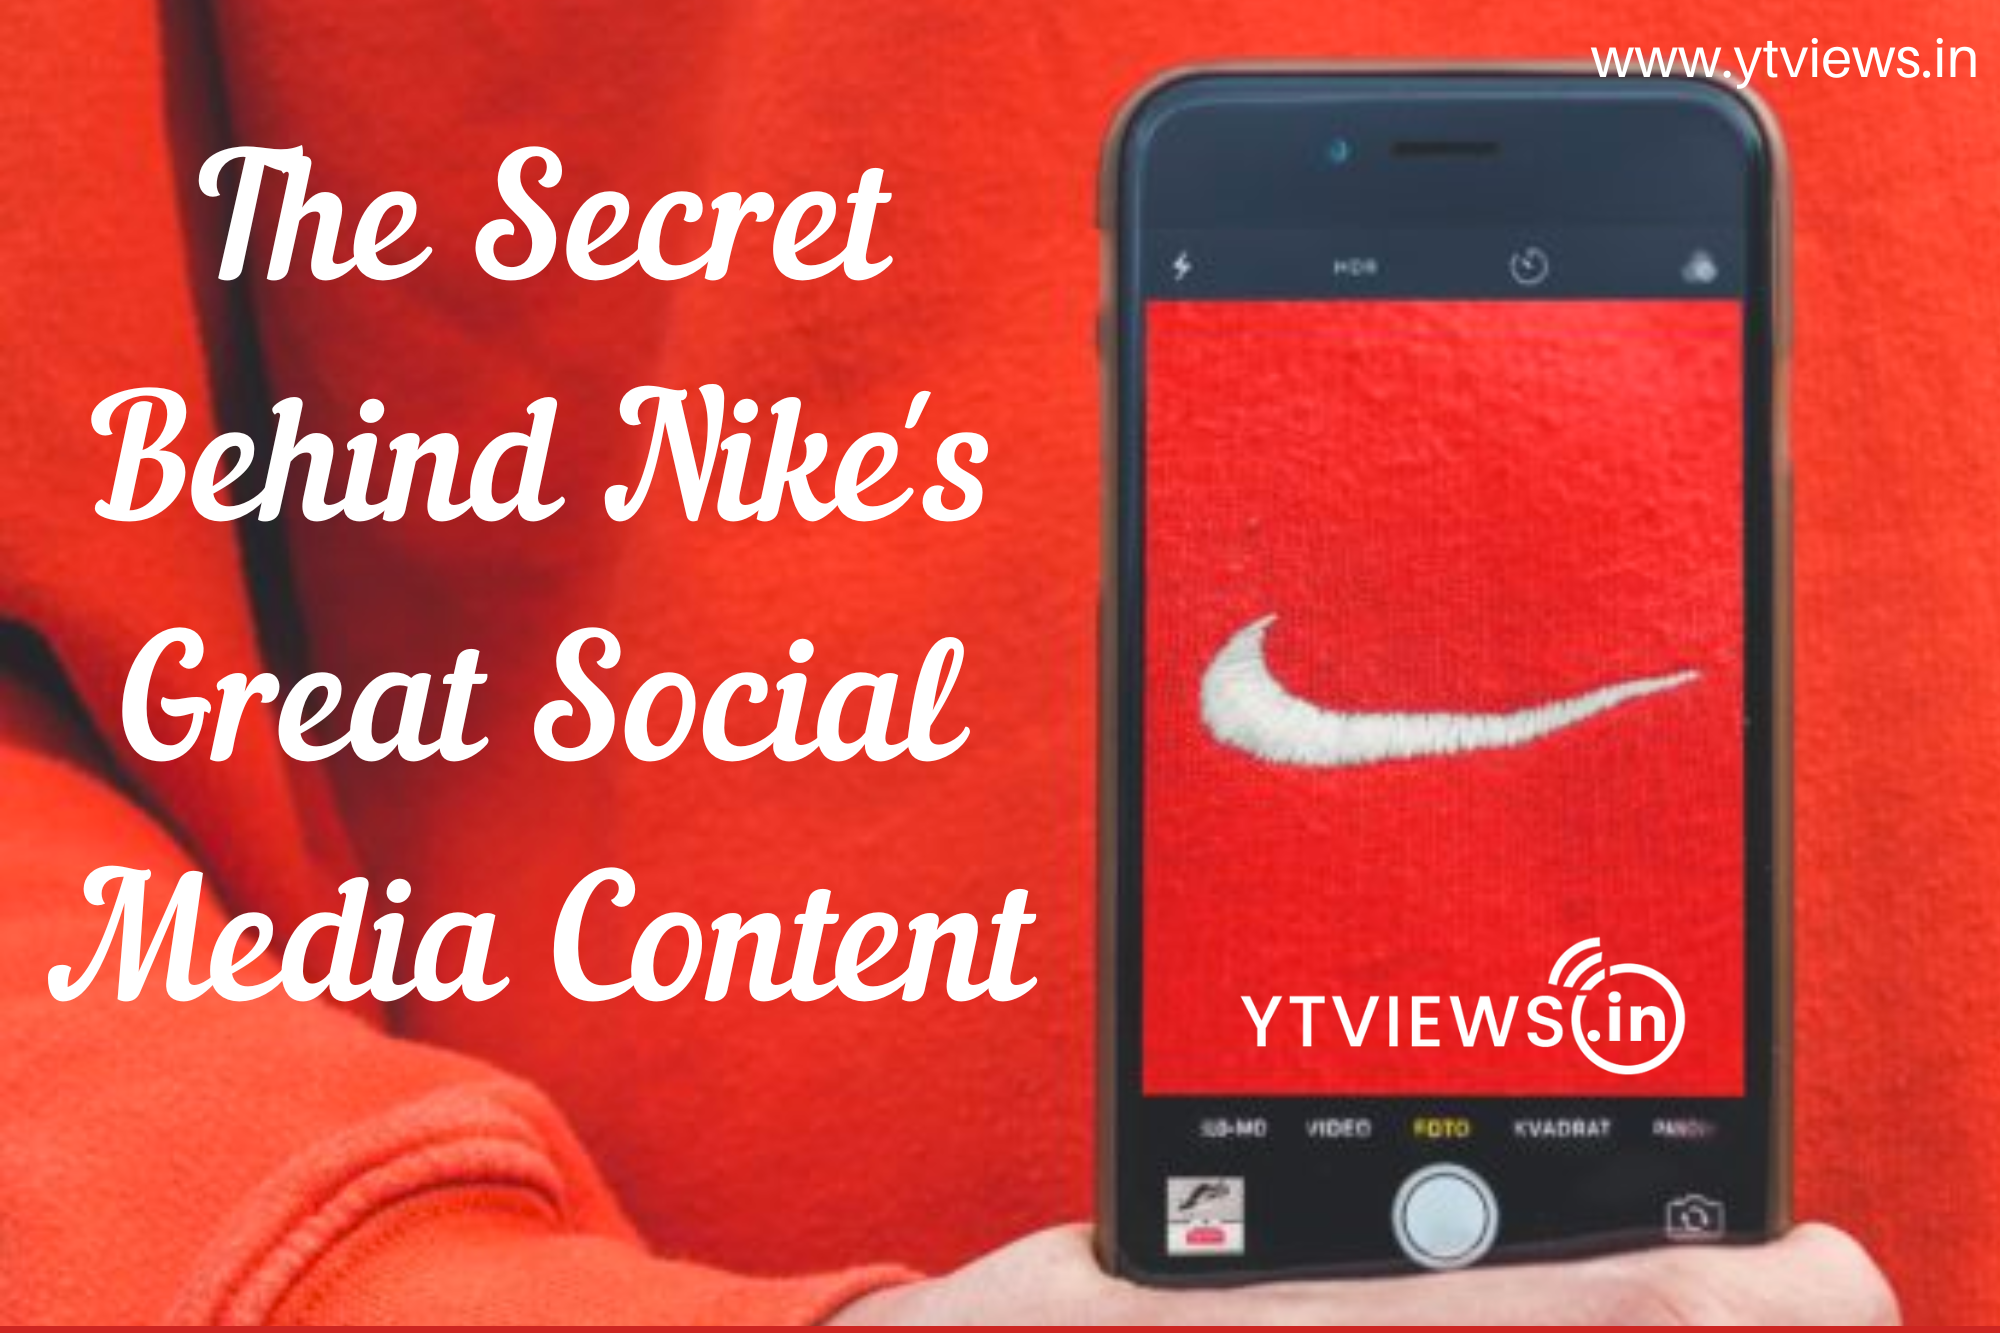 The secret behind Nike’s great social media content